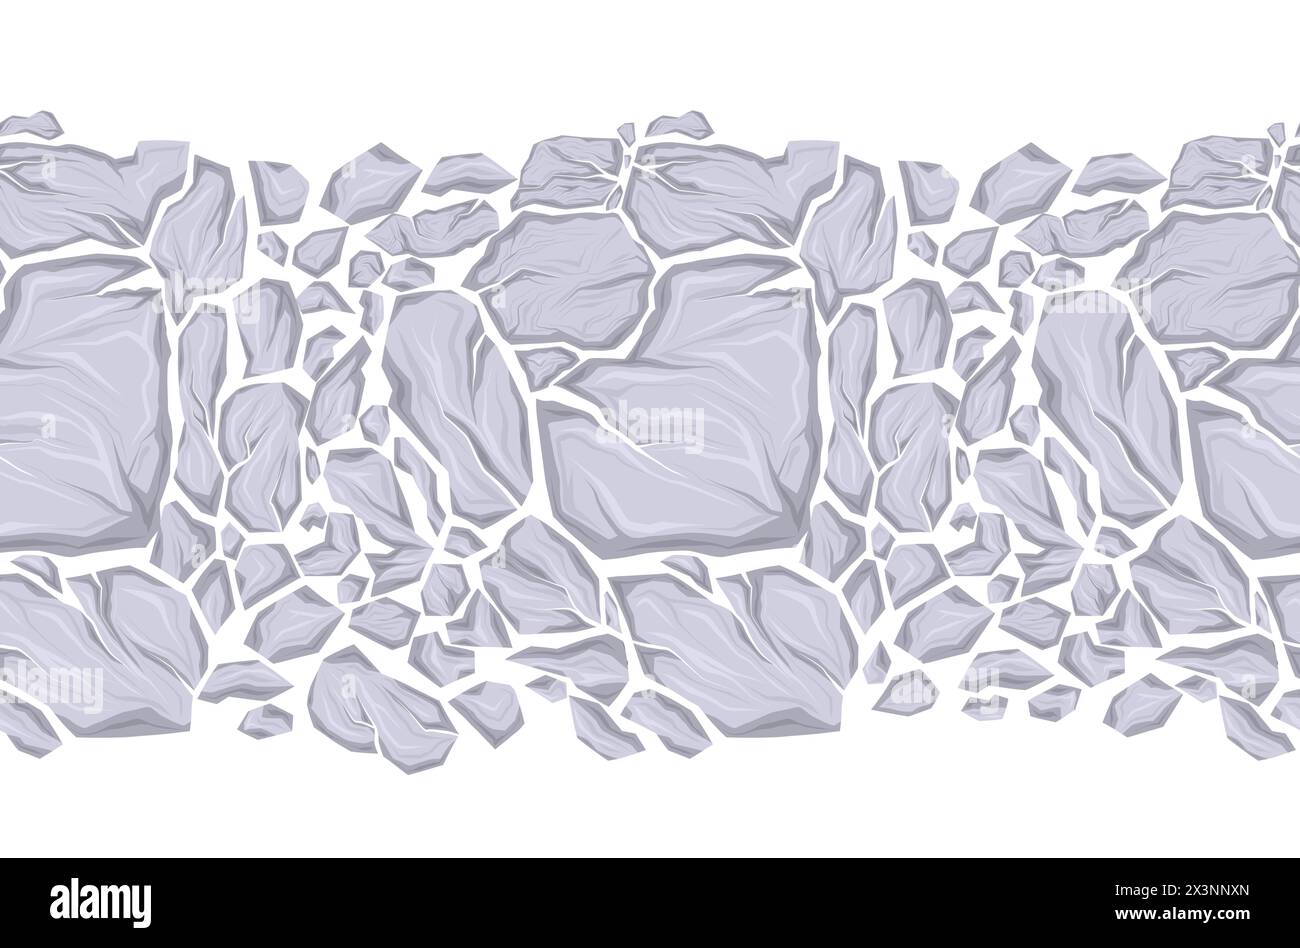 Horizontal vector seamless border with broken white stones isolated from background. Texture frame with smashed marble rocks with cracks for frames an Stock Vector